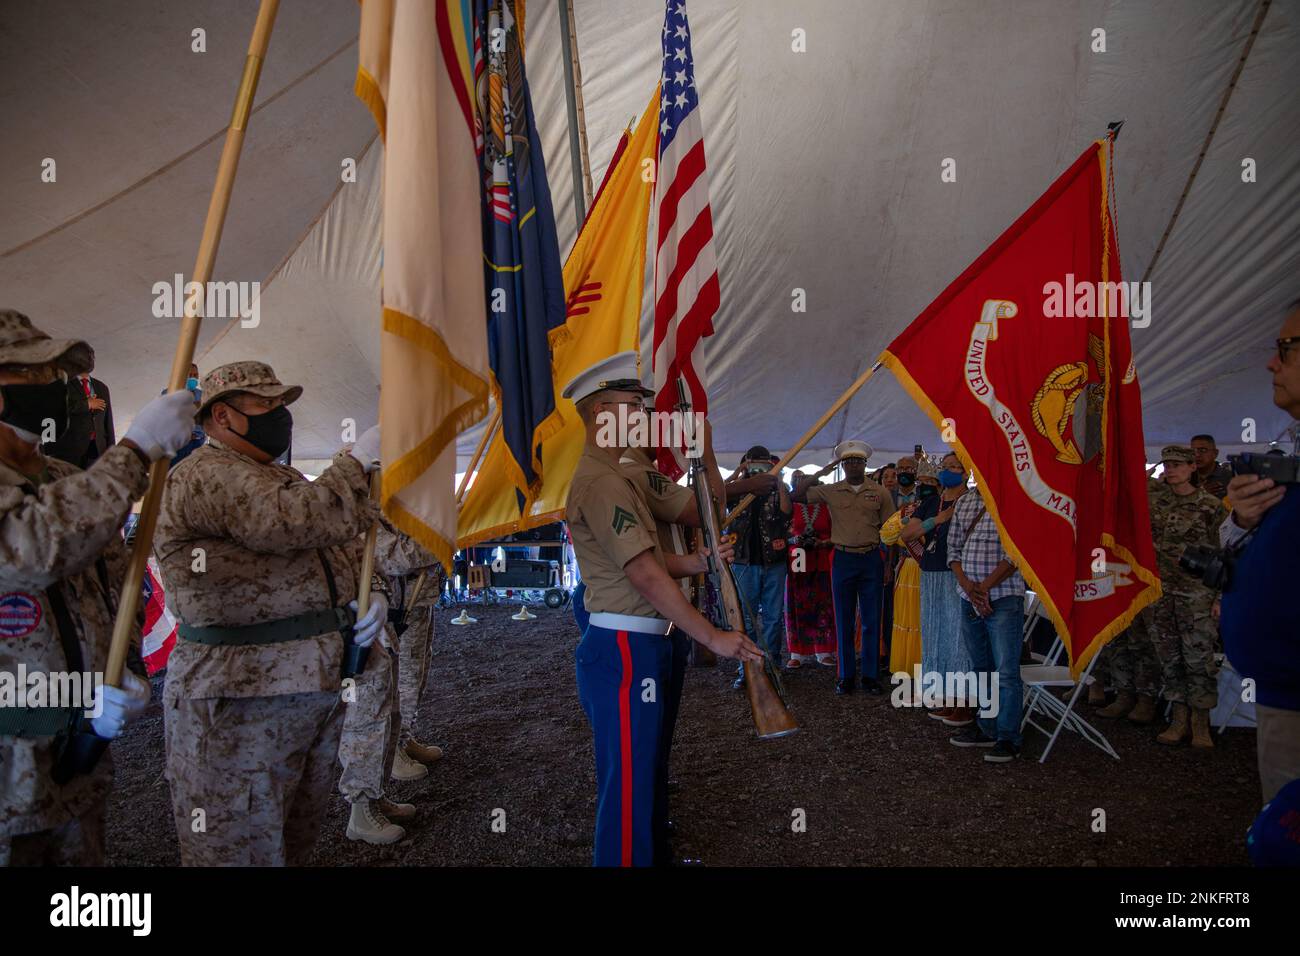 Marines with Bulk Fuel Company, 6th Engineer Support Battalion, 4th Marine Logistics Group, and The Upper Fruitland Veteran Color Guard, present the Marne Corps and Navajo Colors during the 80th anniversary of the founding of the Navajo Code Talkers at Tse Bonito, N.M., Aug. 14, 2022. In 1982, U.S. President Ronald Reagan designated Aug. 14 as National Navajo Code Talkers Day. Proclamation 4954 encouraged all Americans to remember and honor the contributions of the Navajo Nation and all Native Americans who gave of their  special talents and their lives in service of our country so that others Stock Photo